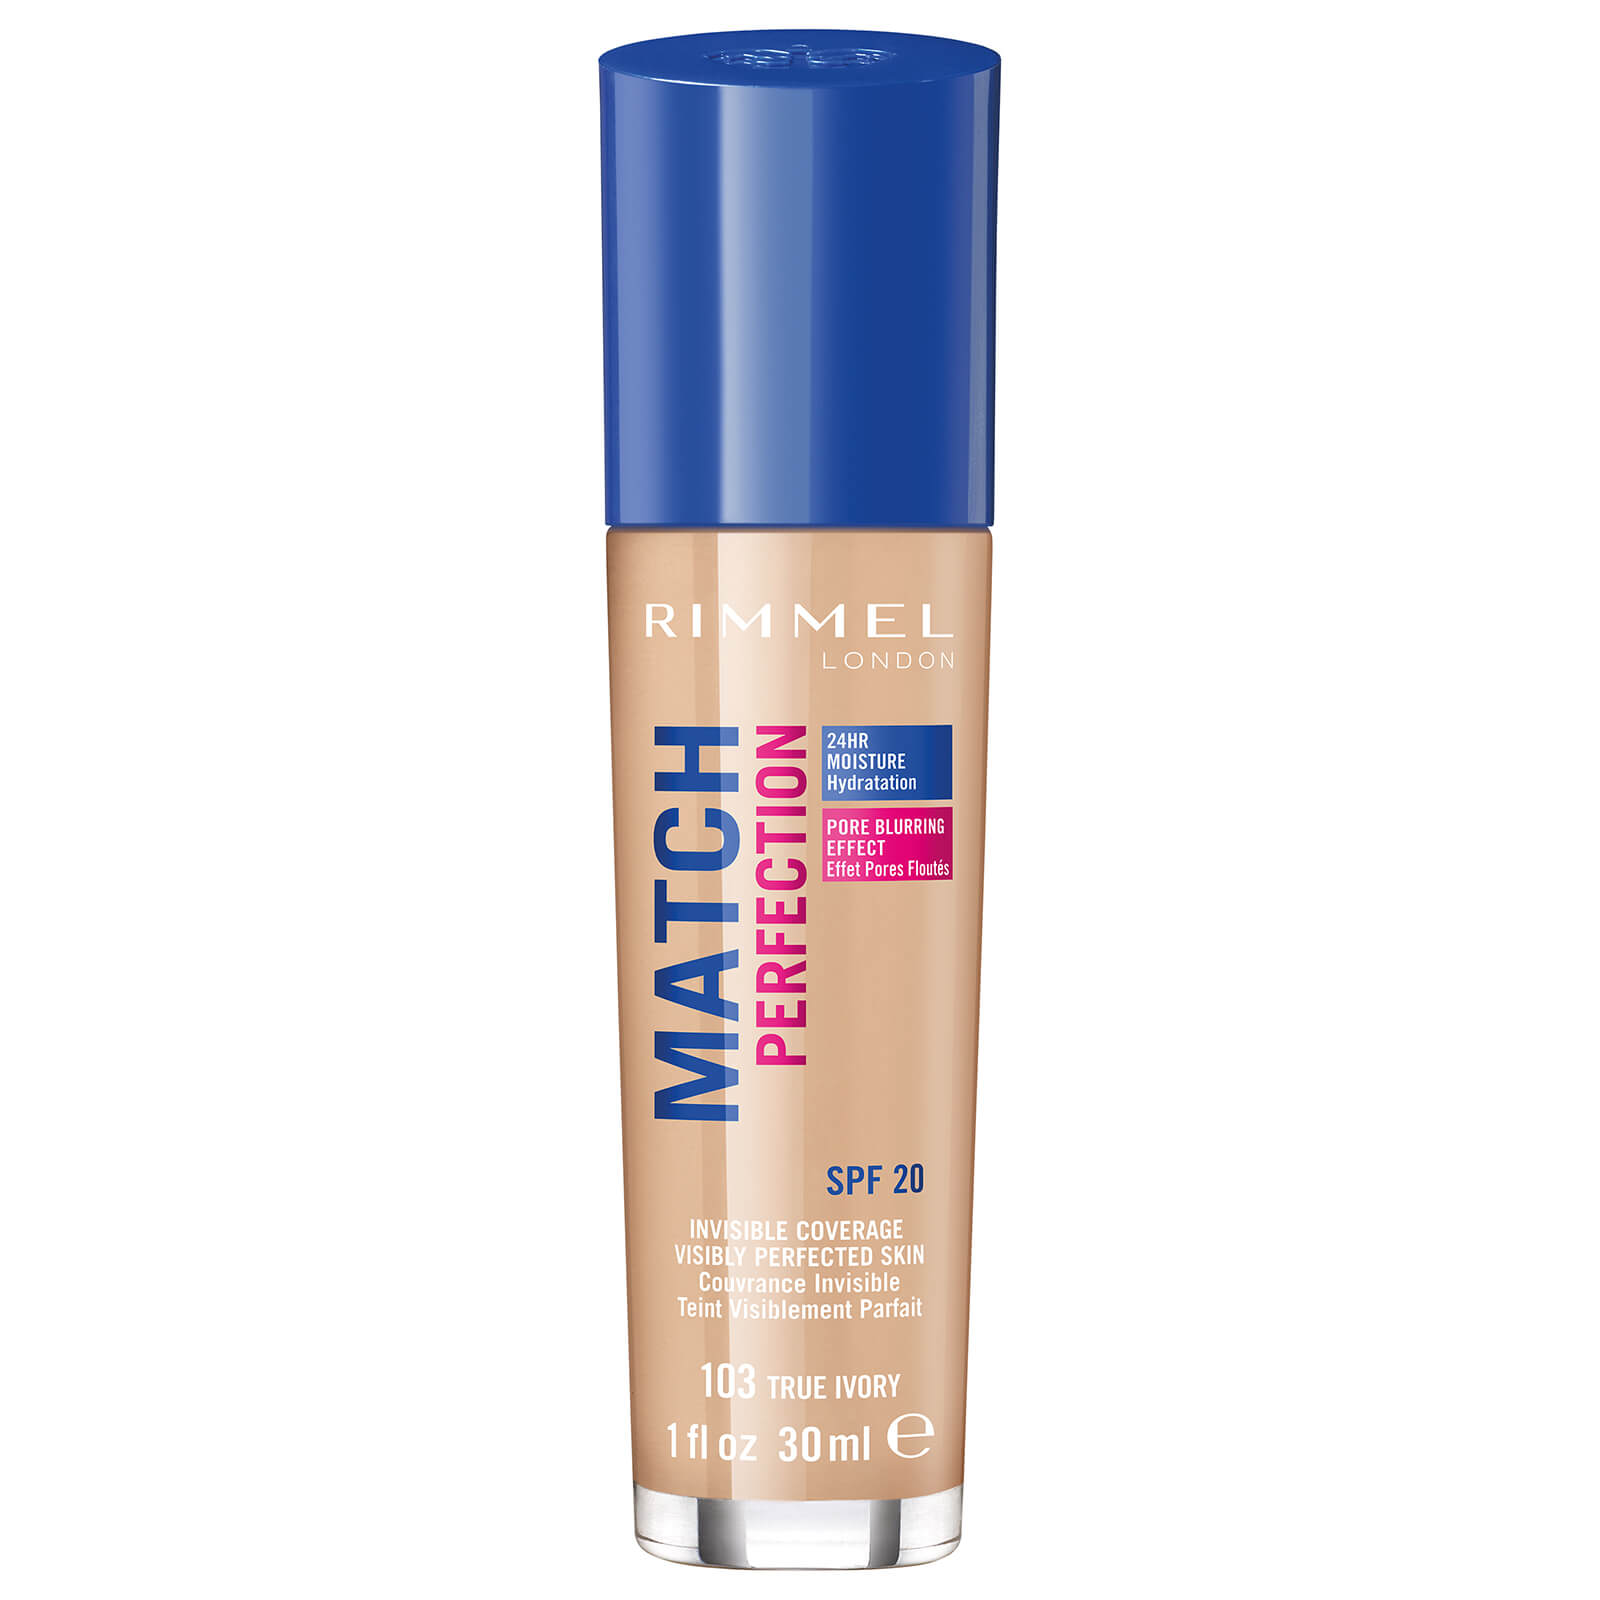 Rimmel Match Perfection Foundation 30ml (Various Shades) - True Ivory